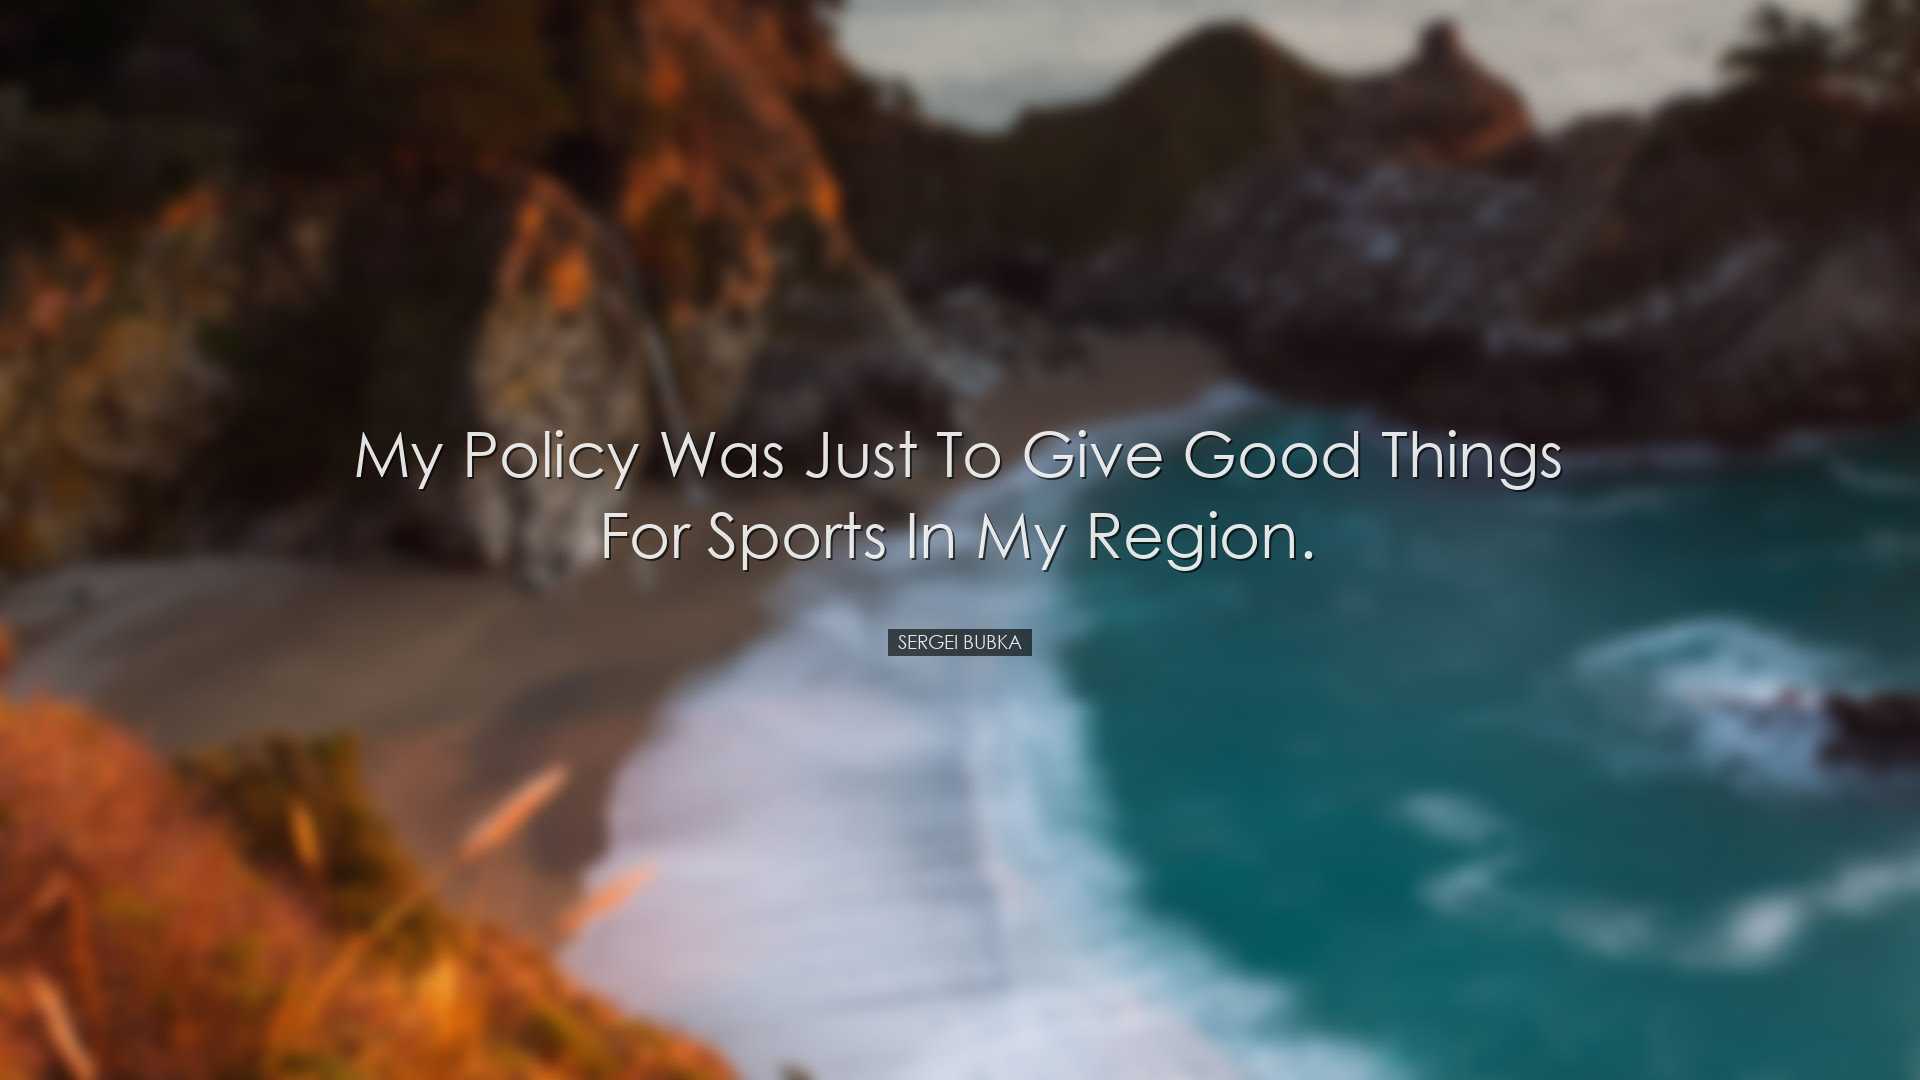 My policy was just to give good things for sports in my region. -